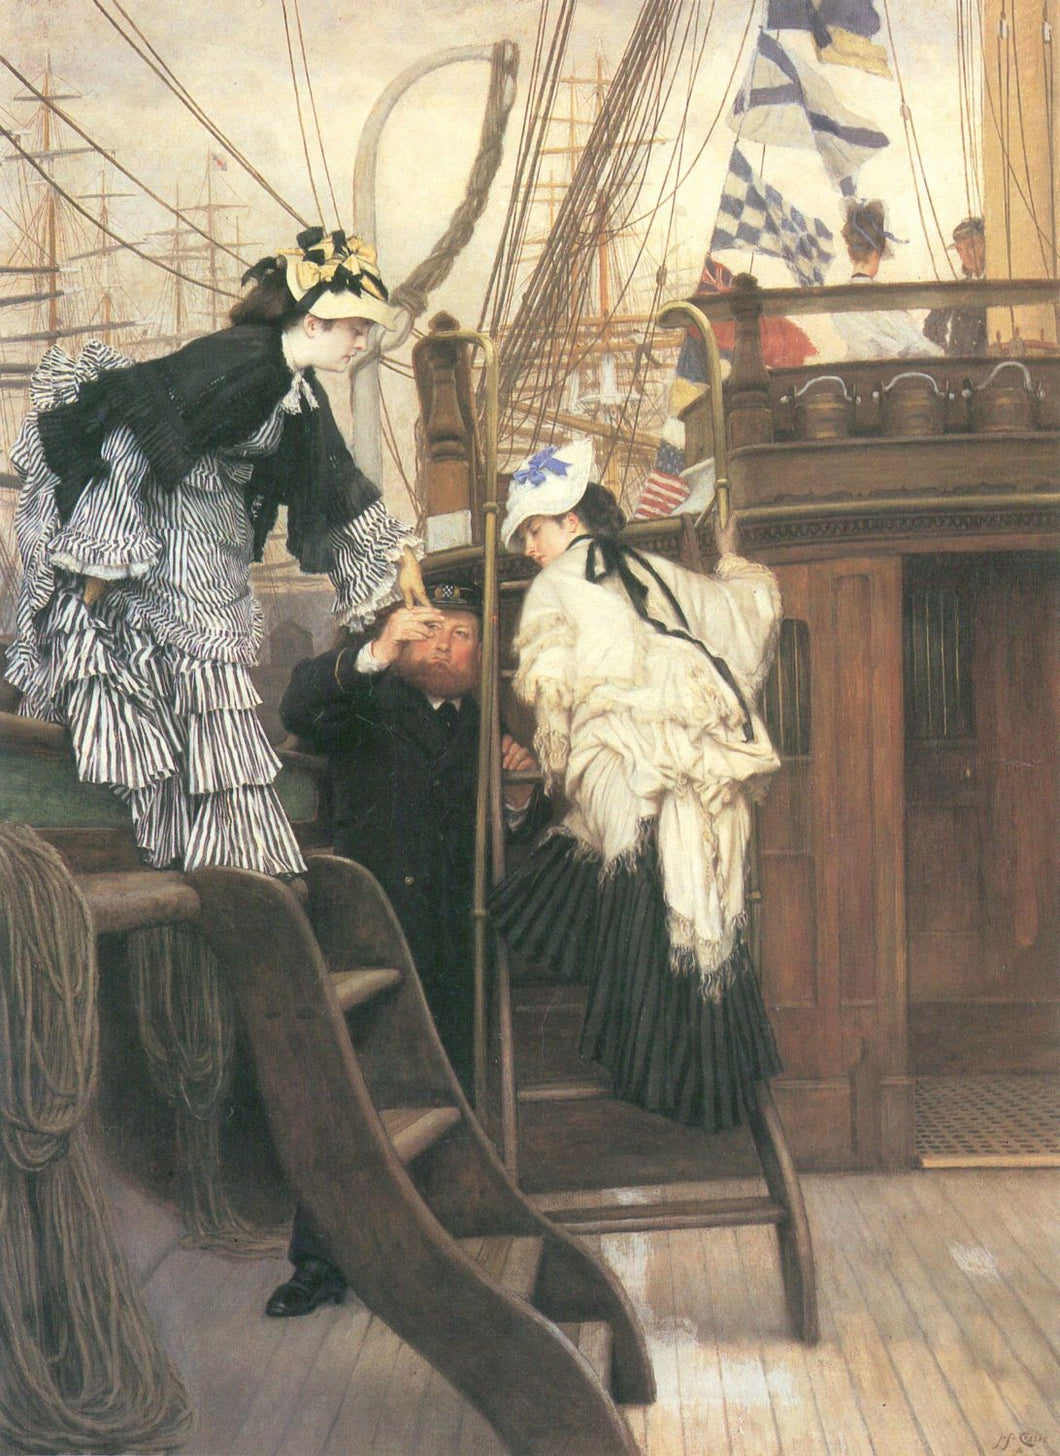 Joseph Tissot - Entry to the Yacht by Tissot